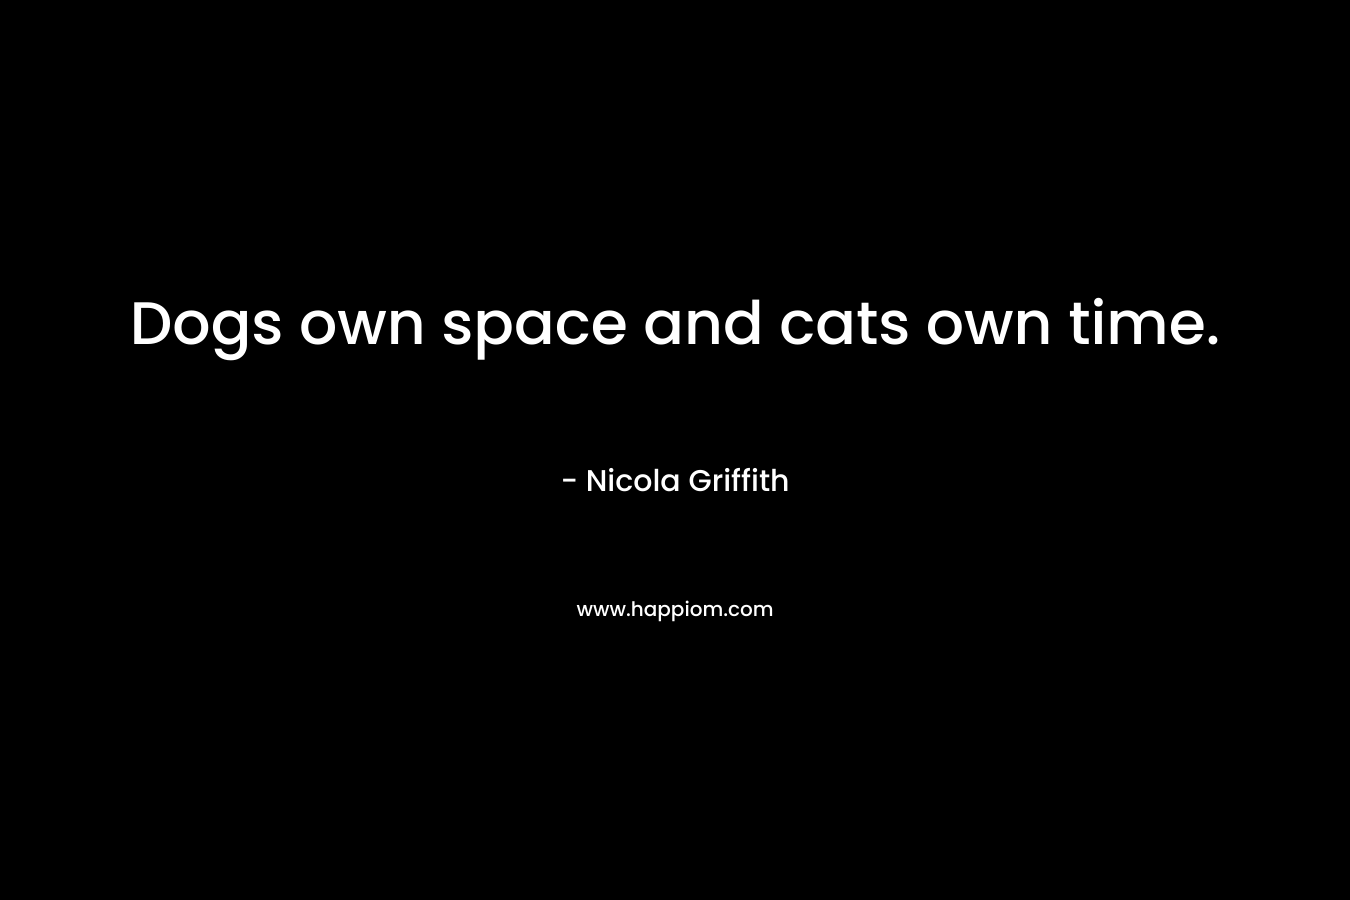 Dogs own space and cats own time. – Nicola Griffith